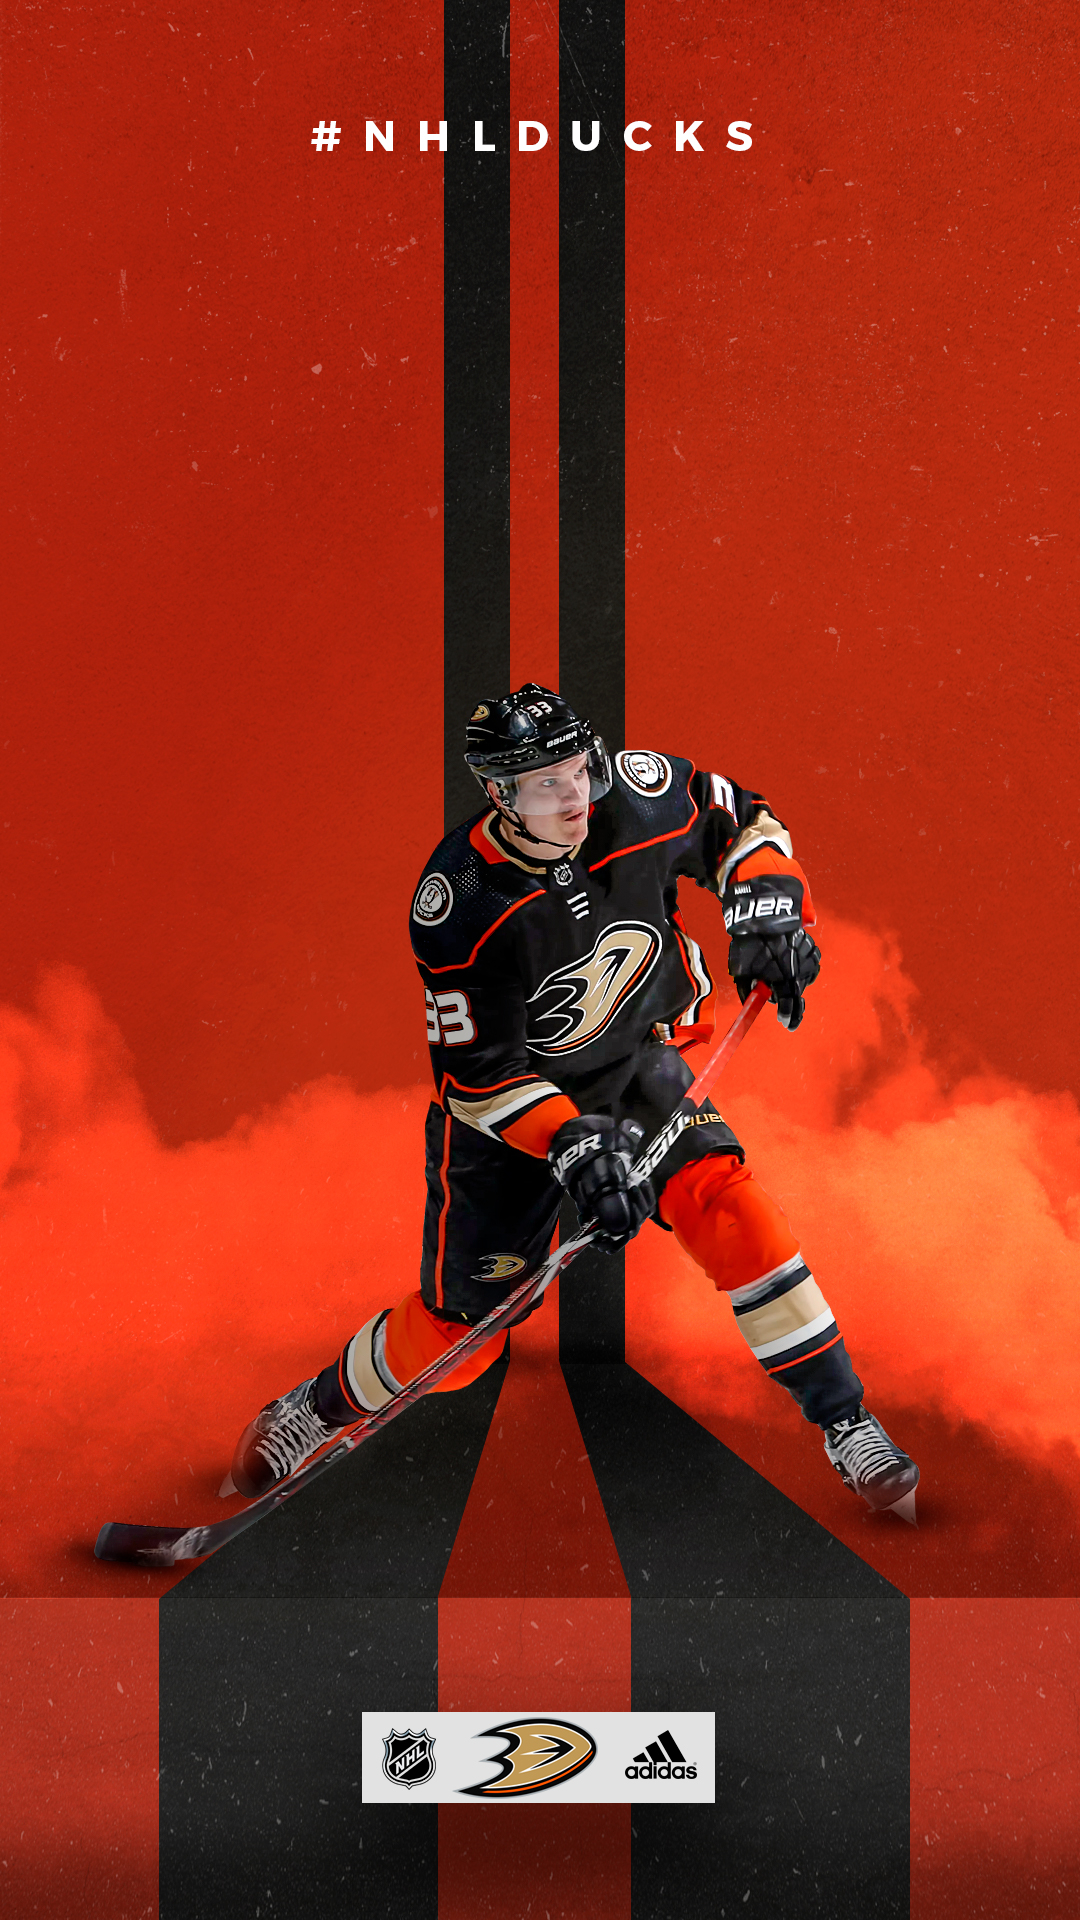 1080x1920 All NHL Teams Phone Wallpapers by Emil Andersson (Twitter: @bobemil_sw13) Album on Imgur